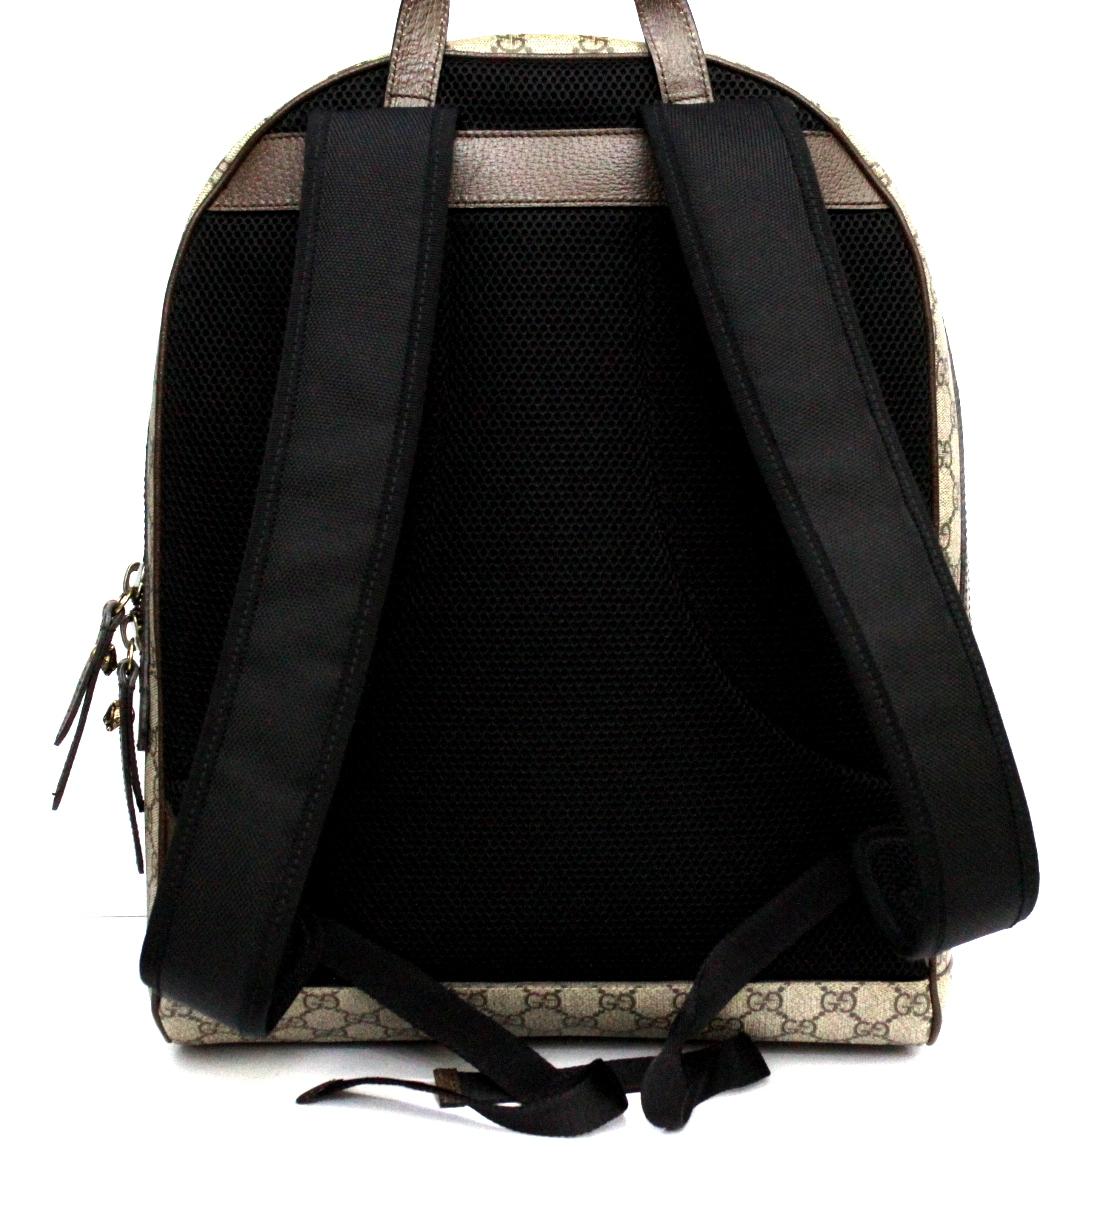 Animalier backpack in GG Supreme fabric with Web detail and hand embroidered, each made by expert Italian artisans with wool blend threads. Each embroidery can differ from a copy for the meticulous process of craftsmanship.
Beige / ebony GG Supreme